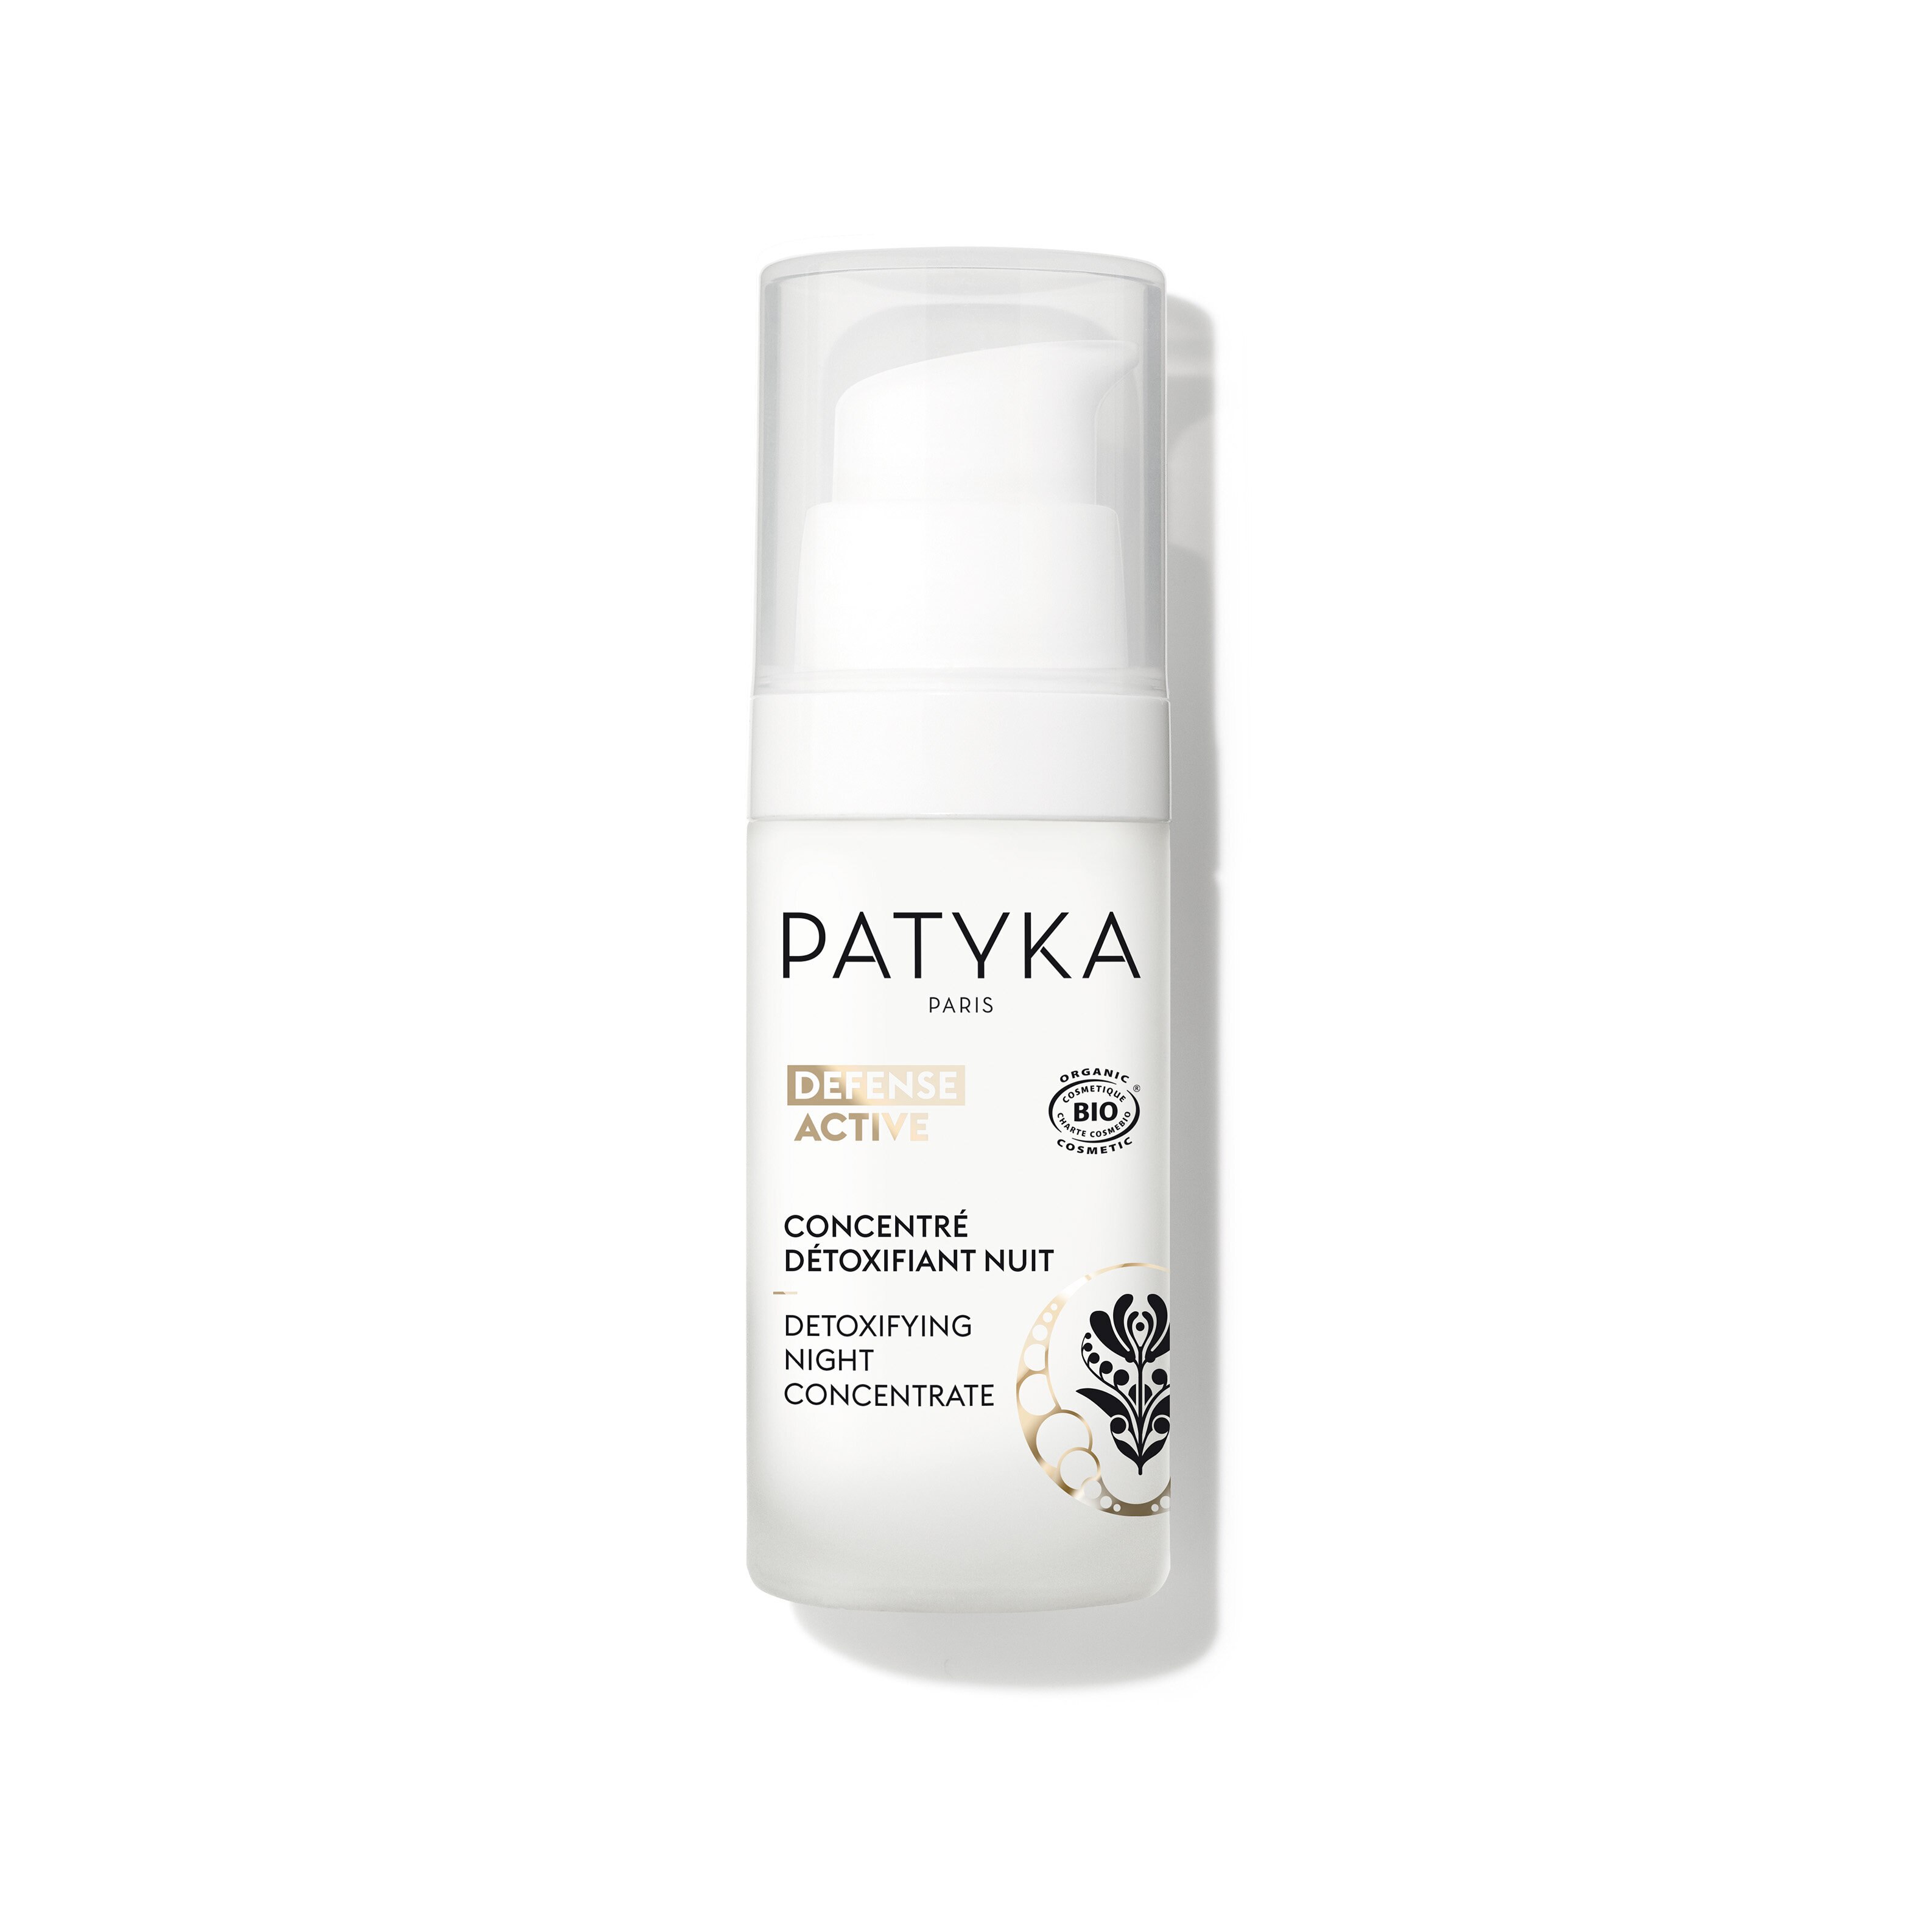 Patyka Detoxifying Night Concentrate